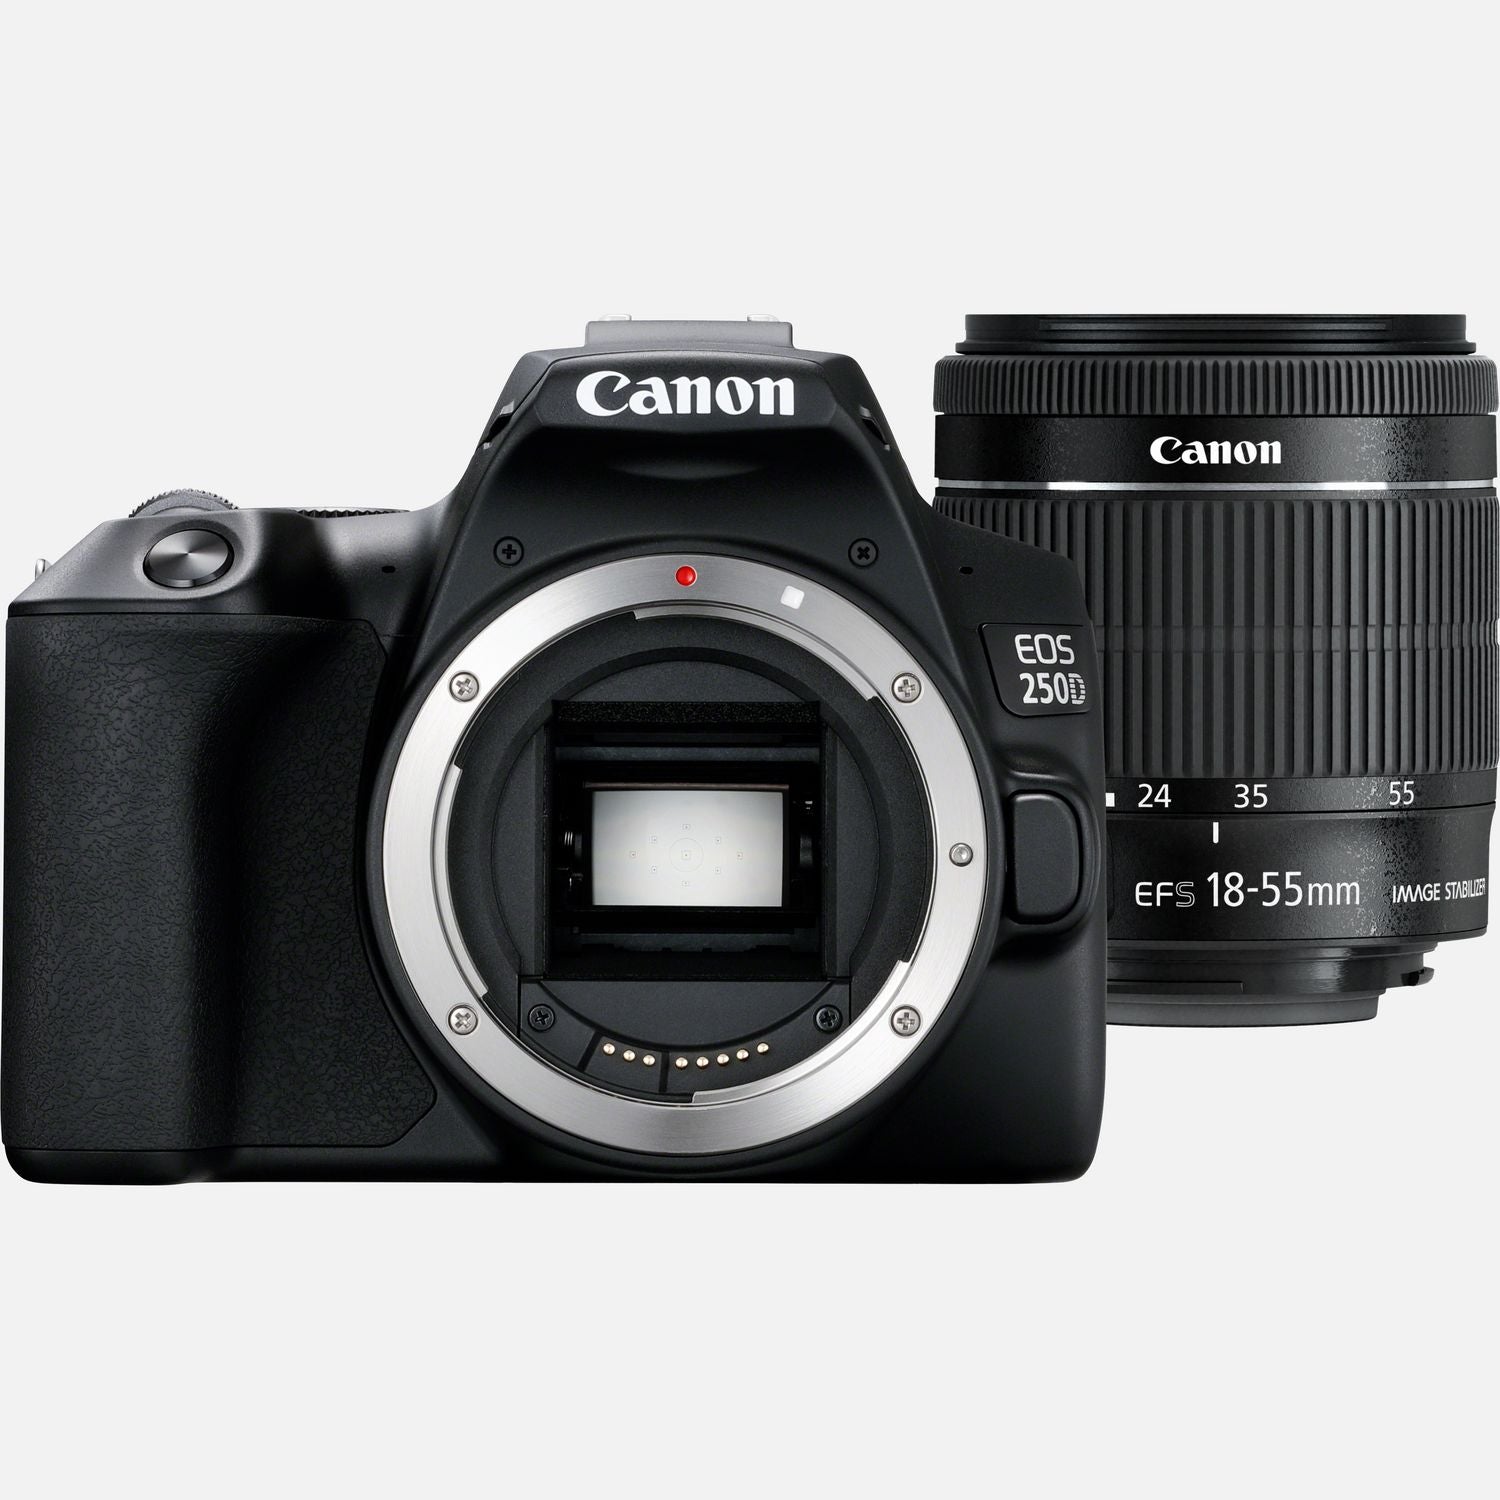 Canon EOS 250D Digital SLR Camera with 18-55mm IS STM Lens - Product Photo 2 - Black Version - Front photo of the camera body and lens seperate. Internal camera components and sensor visible